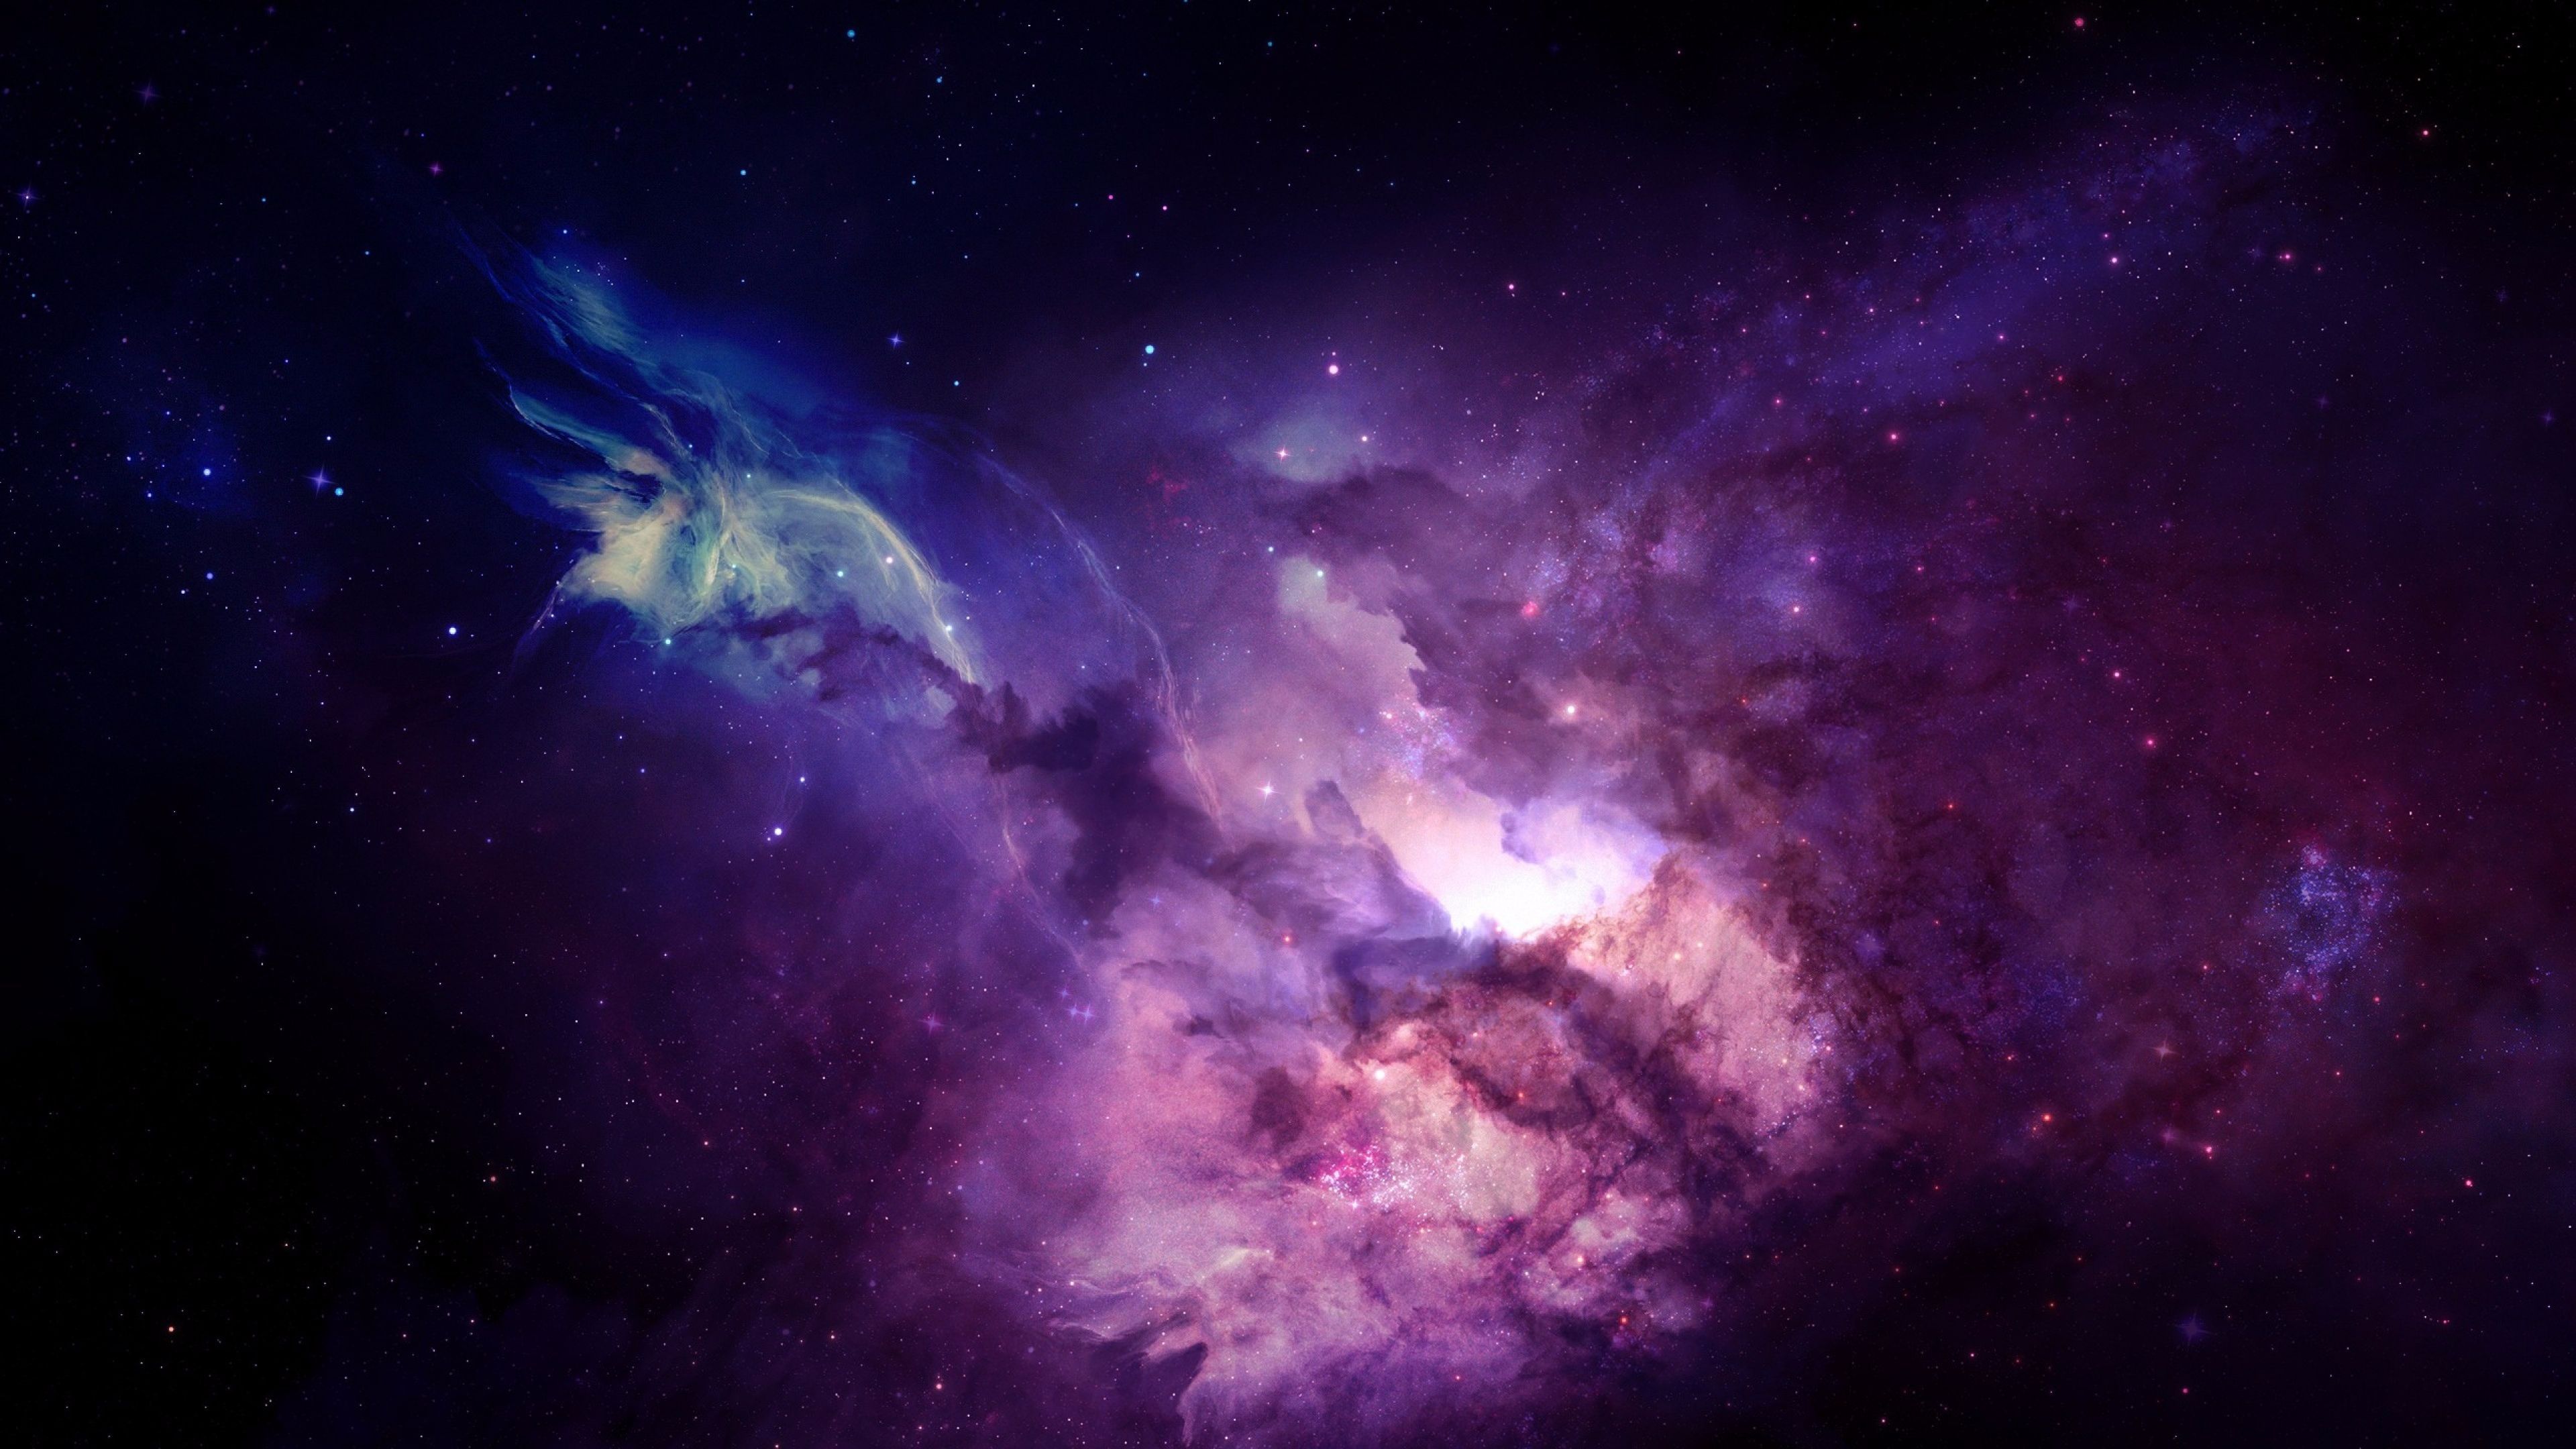 100+] 1920x1080 Hd Space Wallpapers | Wallpapers.com